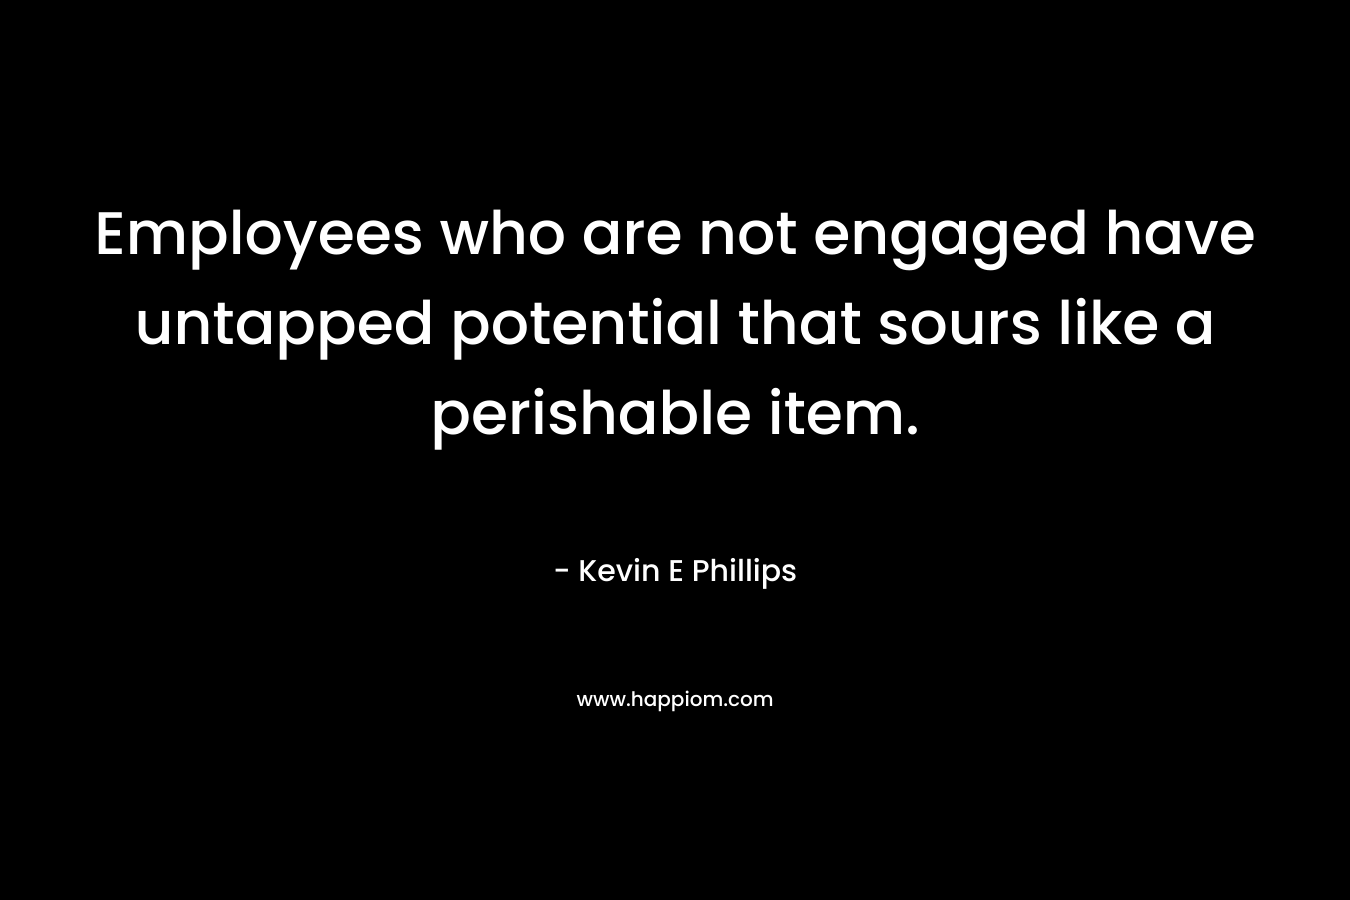 Employees who are not engaged have untapped potential that sours like a perishable item.